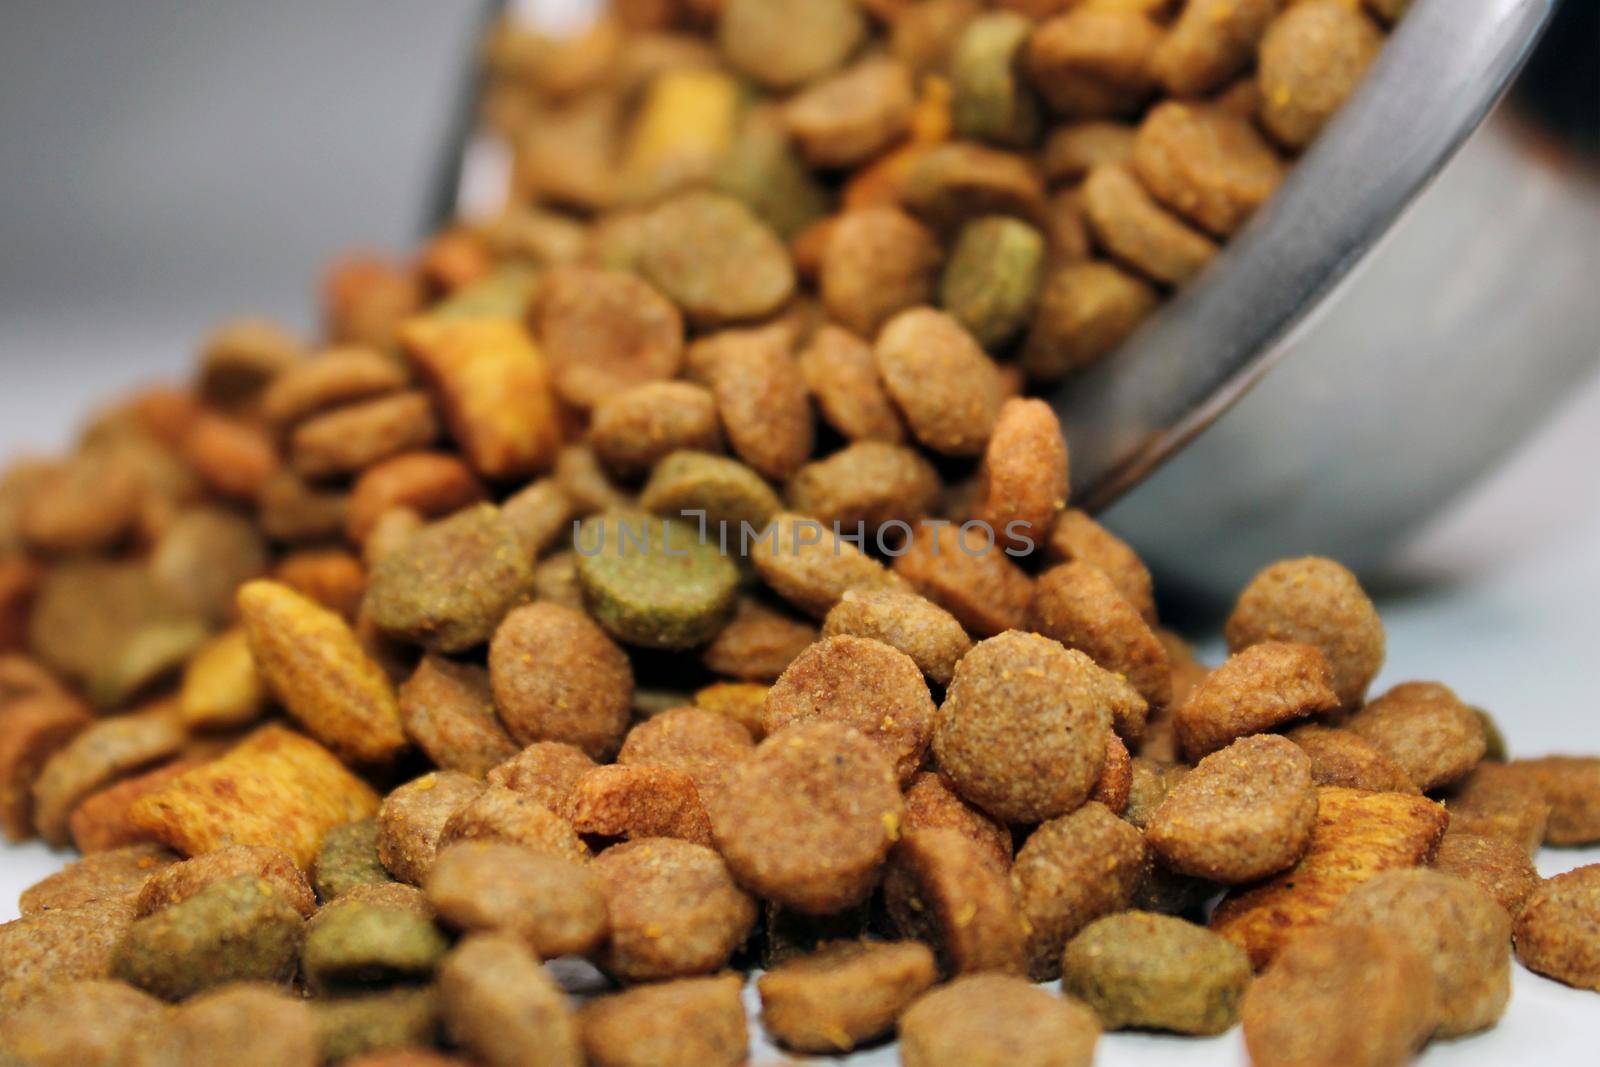 Dry food for cats, dogs, poured out of a bowl, on a light background. Close-up. Blurred background.